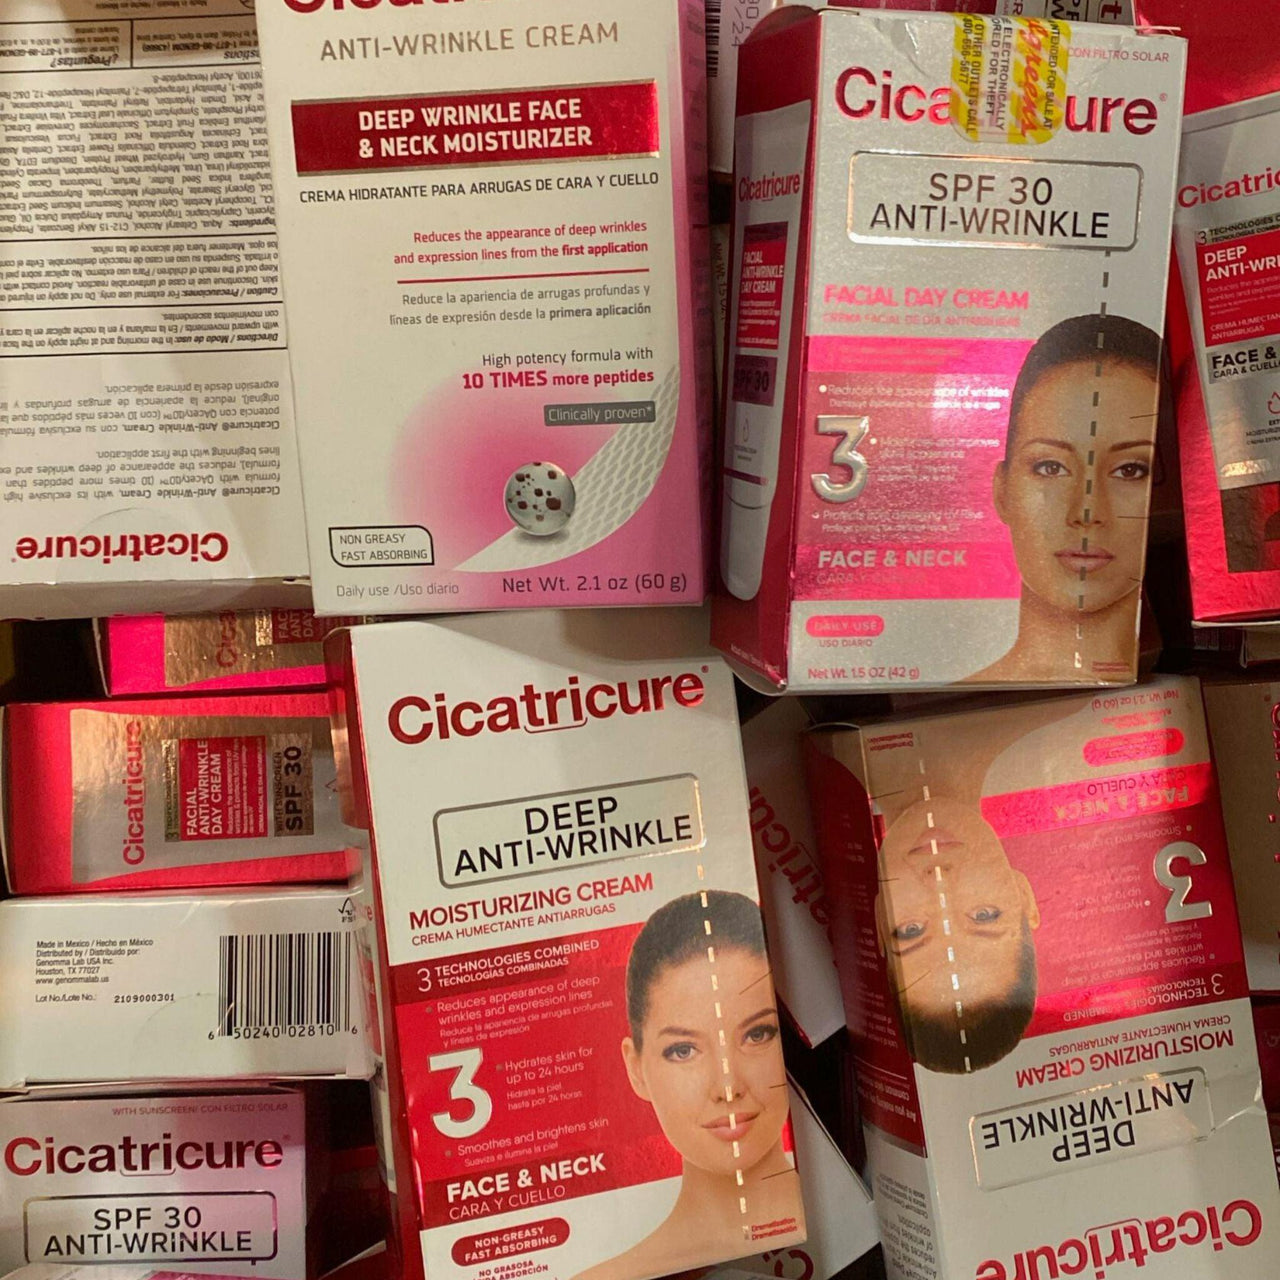 Cicatricure Anti Wrinkle Face & Neck Cream and Cicatricure Advanced Face Cream for Fine Lines & Wrinkles (36 Pcs Lot) - Discount Wholesalers Inc